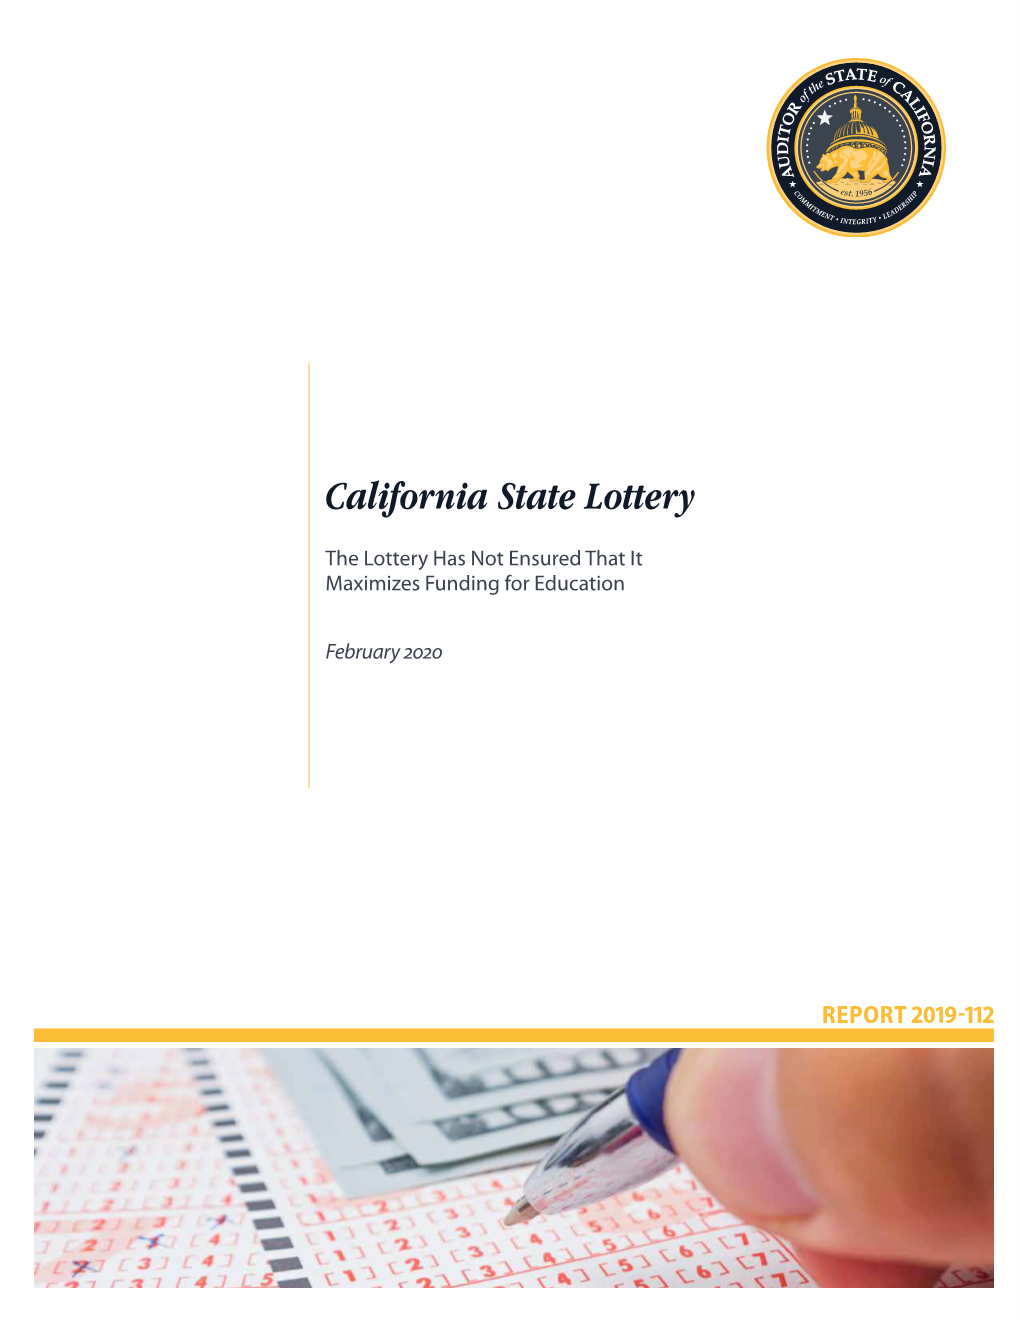 California State Lottery—The Lottery Has Not Ensured That It Maximizes